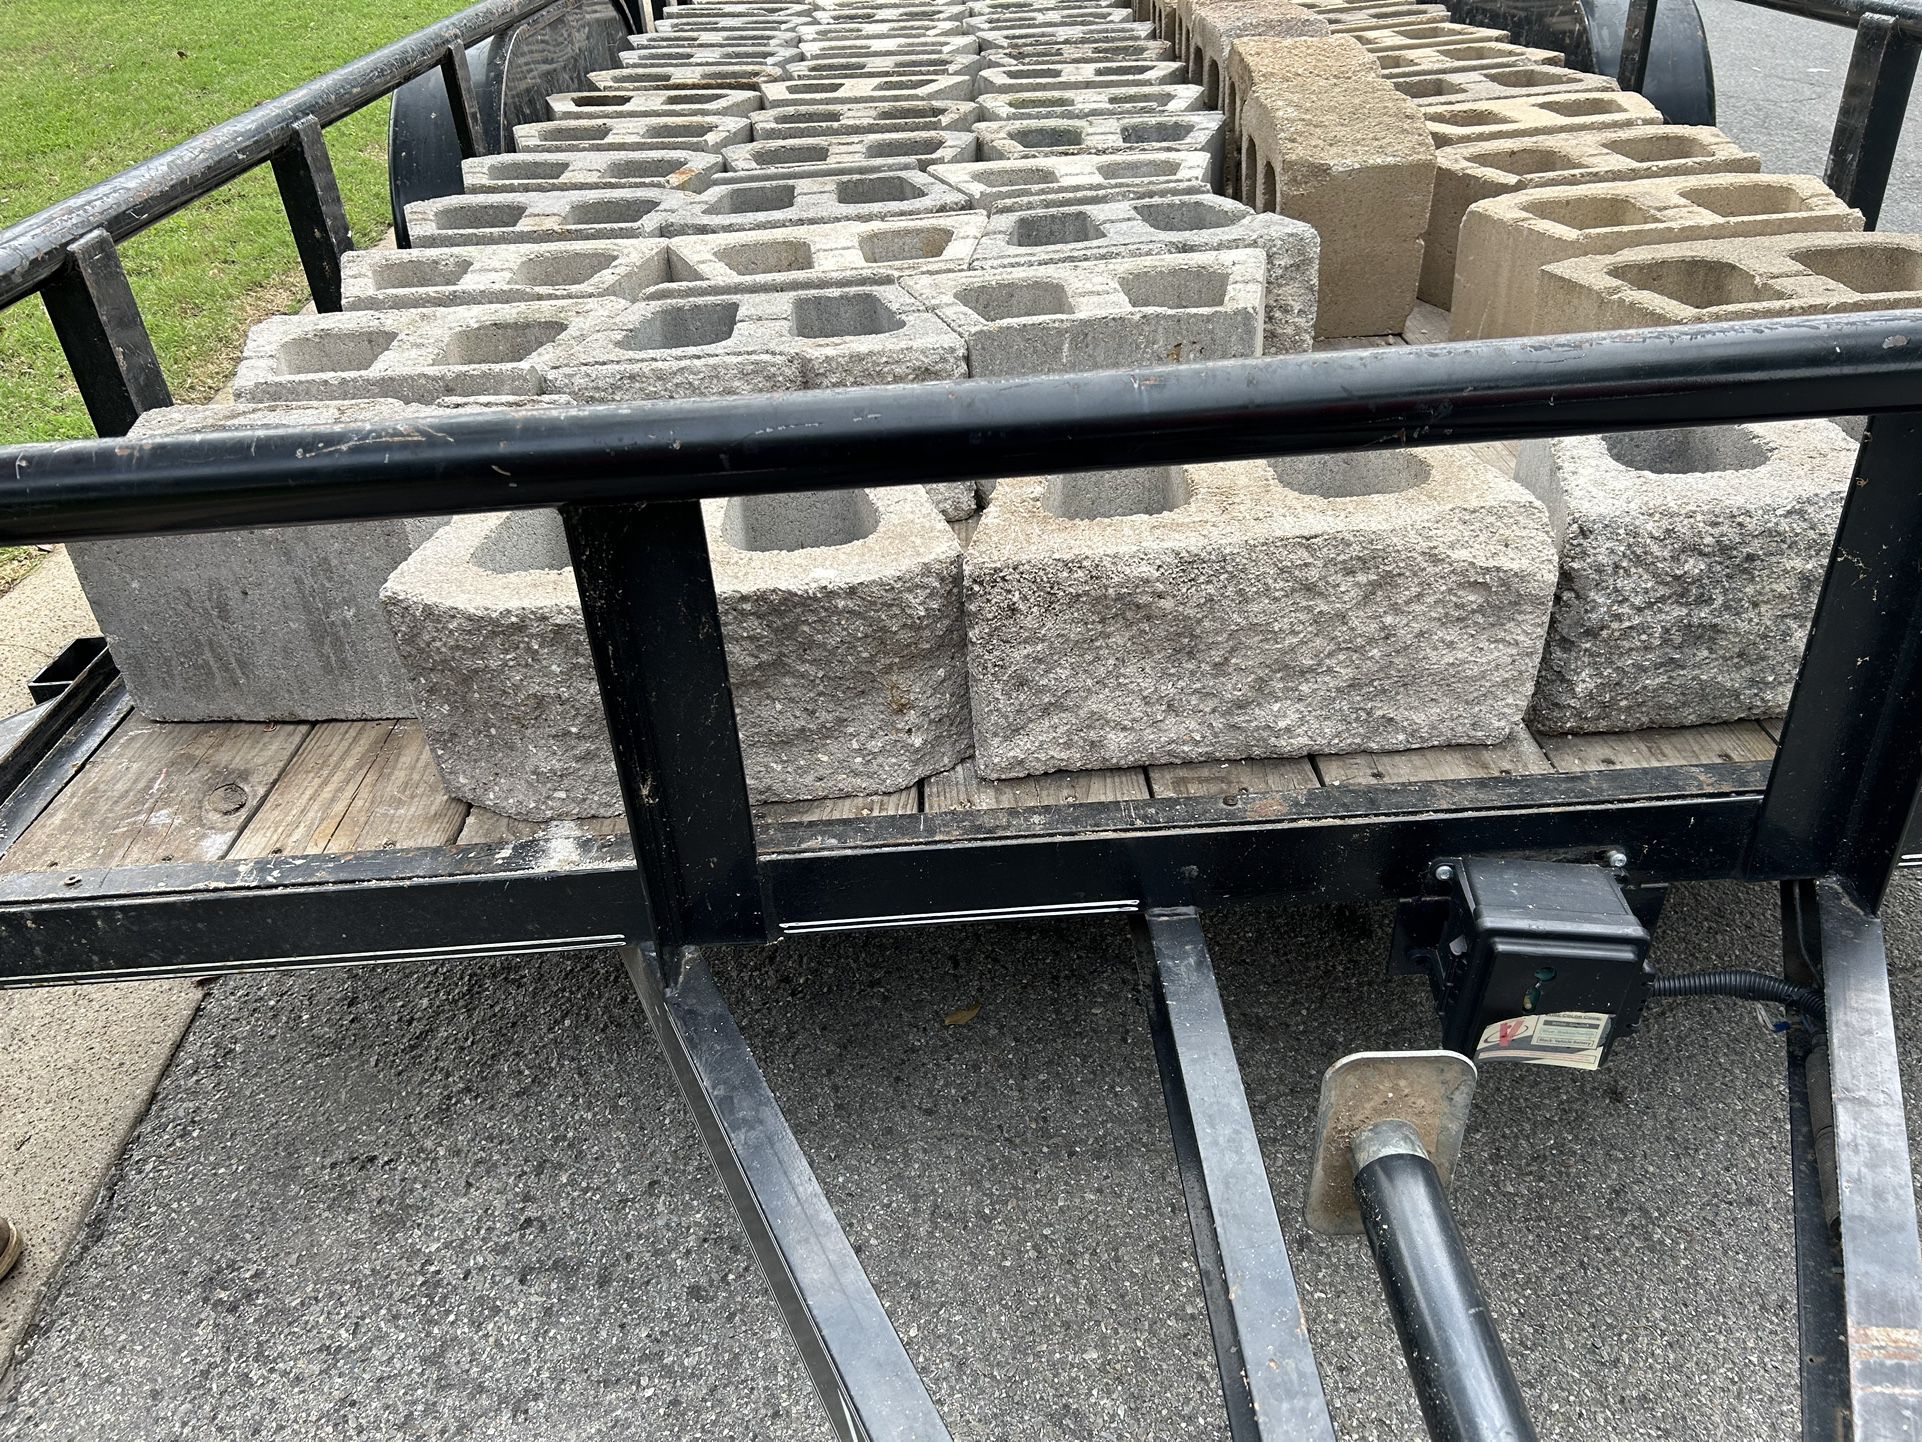 Brand New Pavestone Retainer Wall Blocks. The Cost Retail Is $20.00 Plus Tax Will Sell Today For $5.00 Per Block We Have Like 75 Of Them